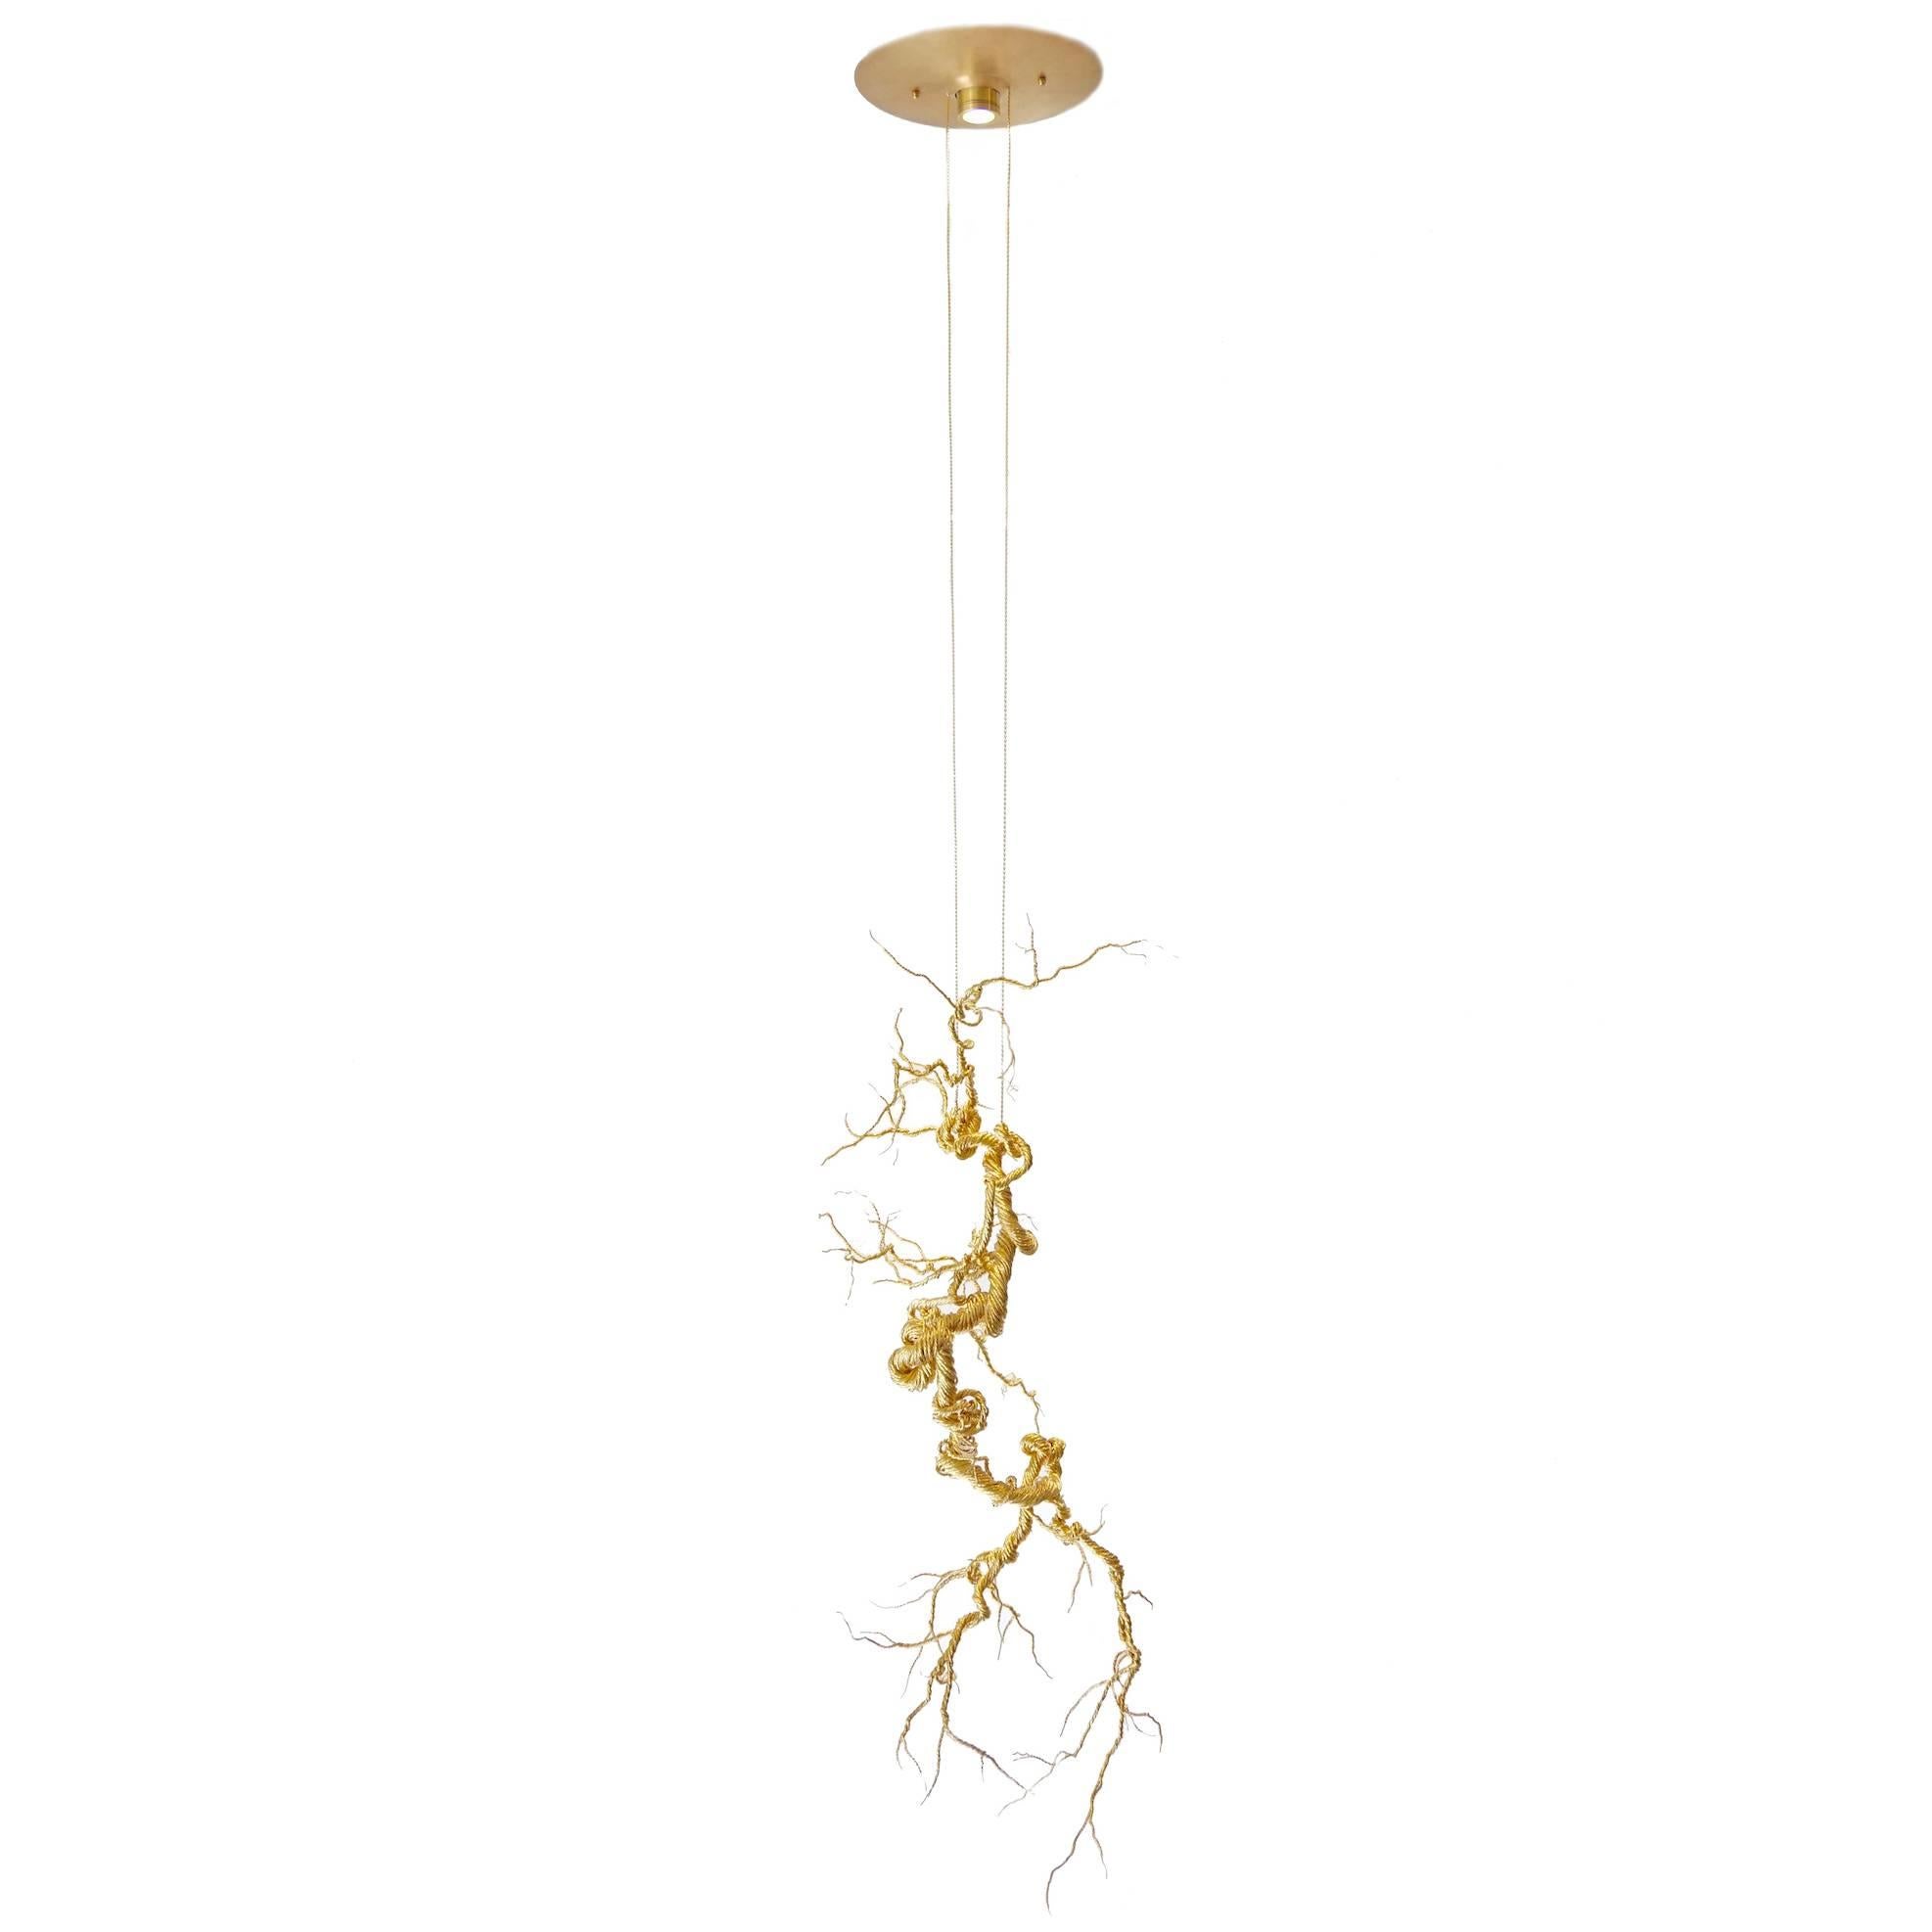 Untitled Twisted Brass Lit Sculpture For Sale